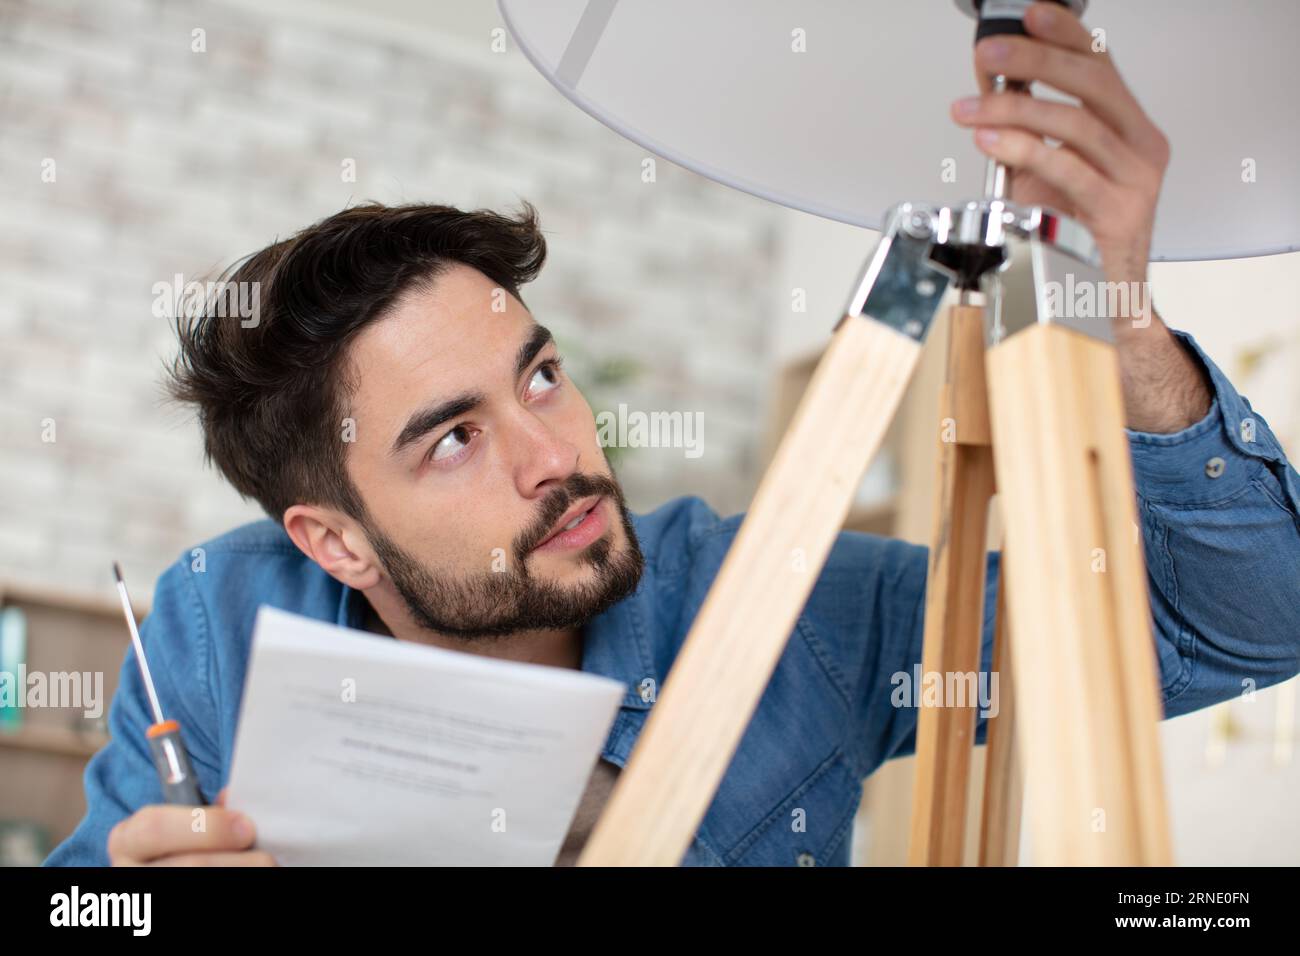 man changing light bulb in pendant lamp indoors Stock Photo